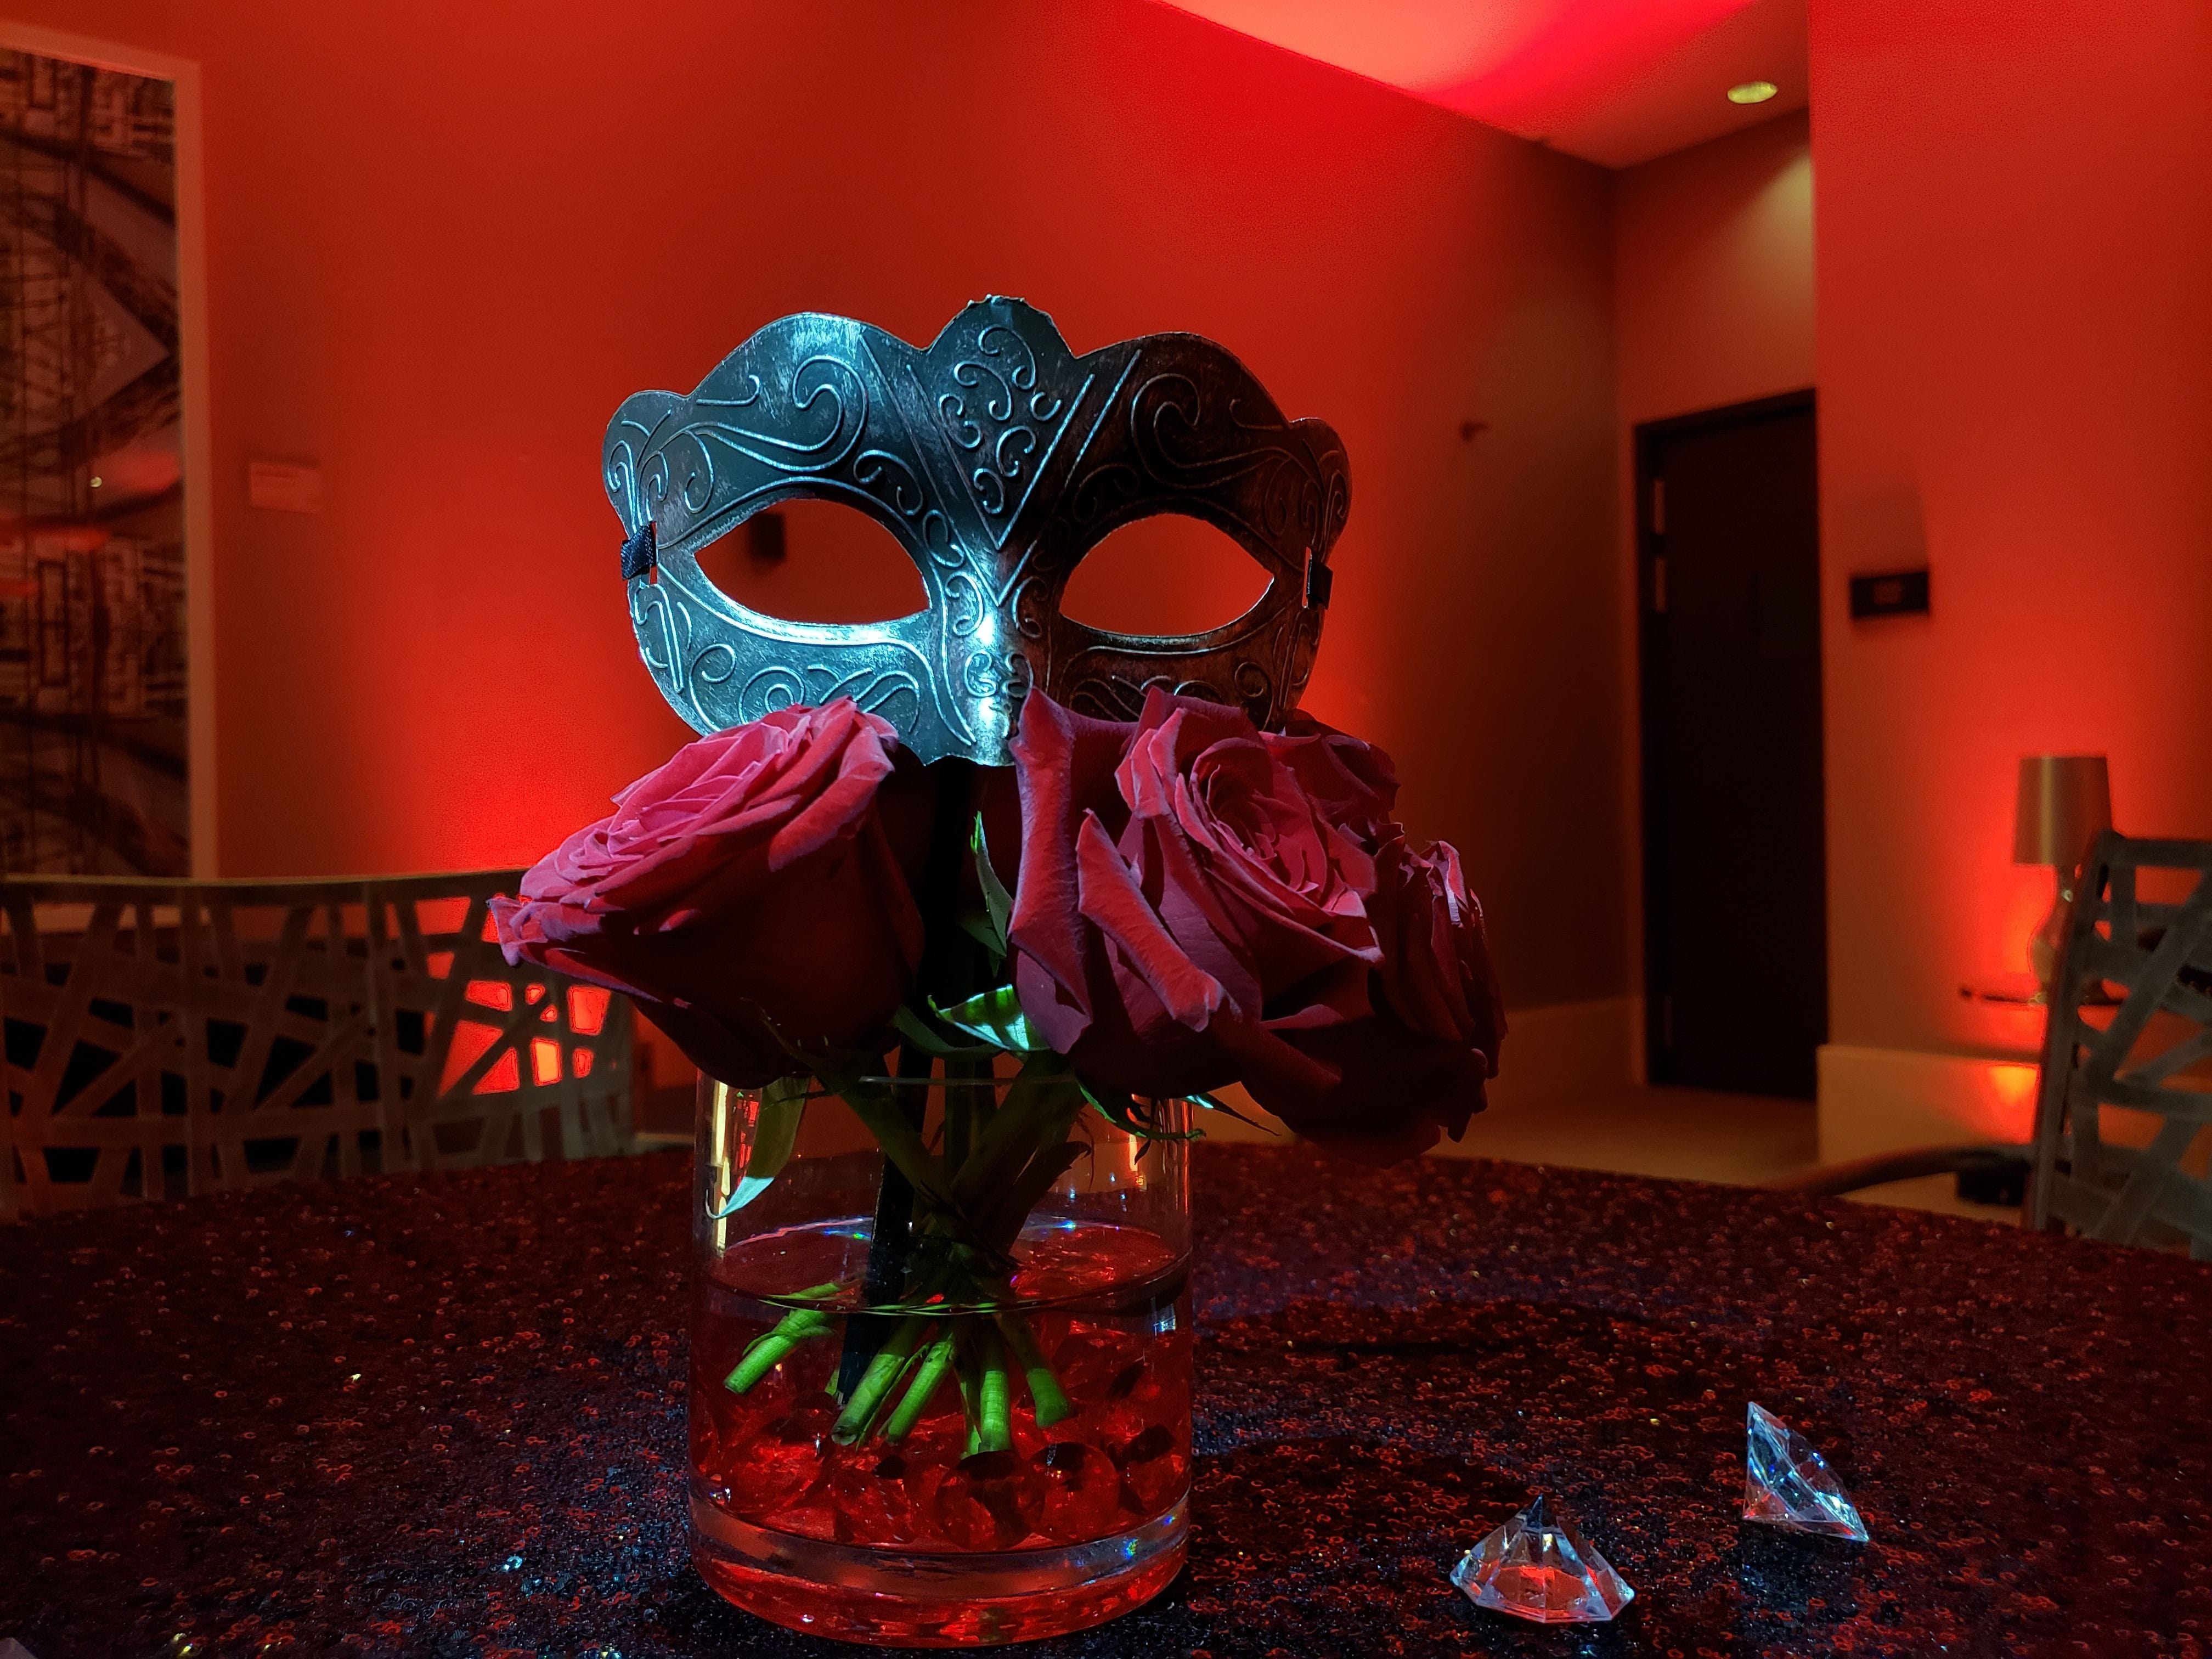 Radisson Blu, Mpls. Lighting for a masquerade ball. Red up lighting, pin spots,backdrop lighting. Decor by Event Lab.